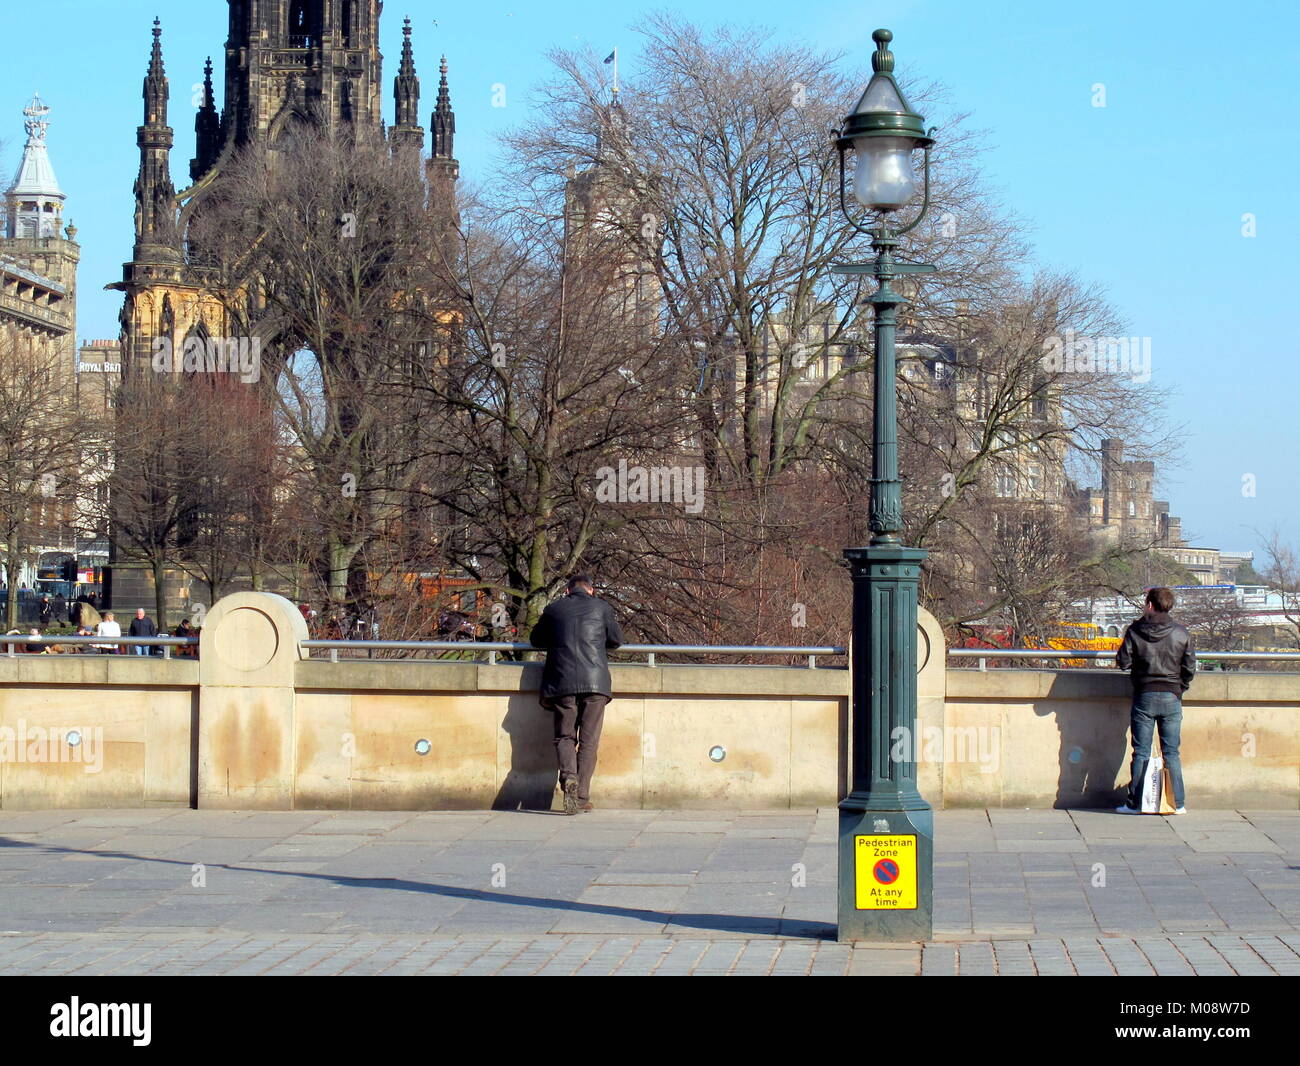 festival tourists young men boys males  on sunny day looking at the walter scott monument everyday street scene viewed from behind Stock Photo